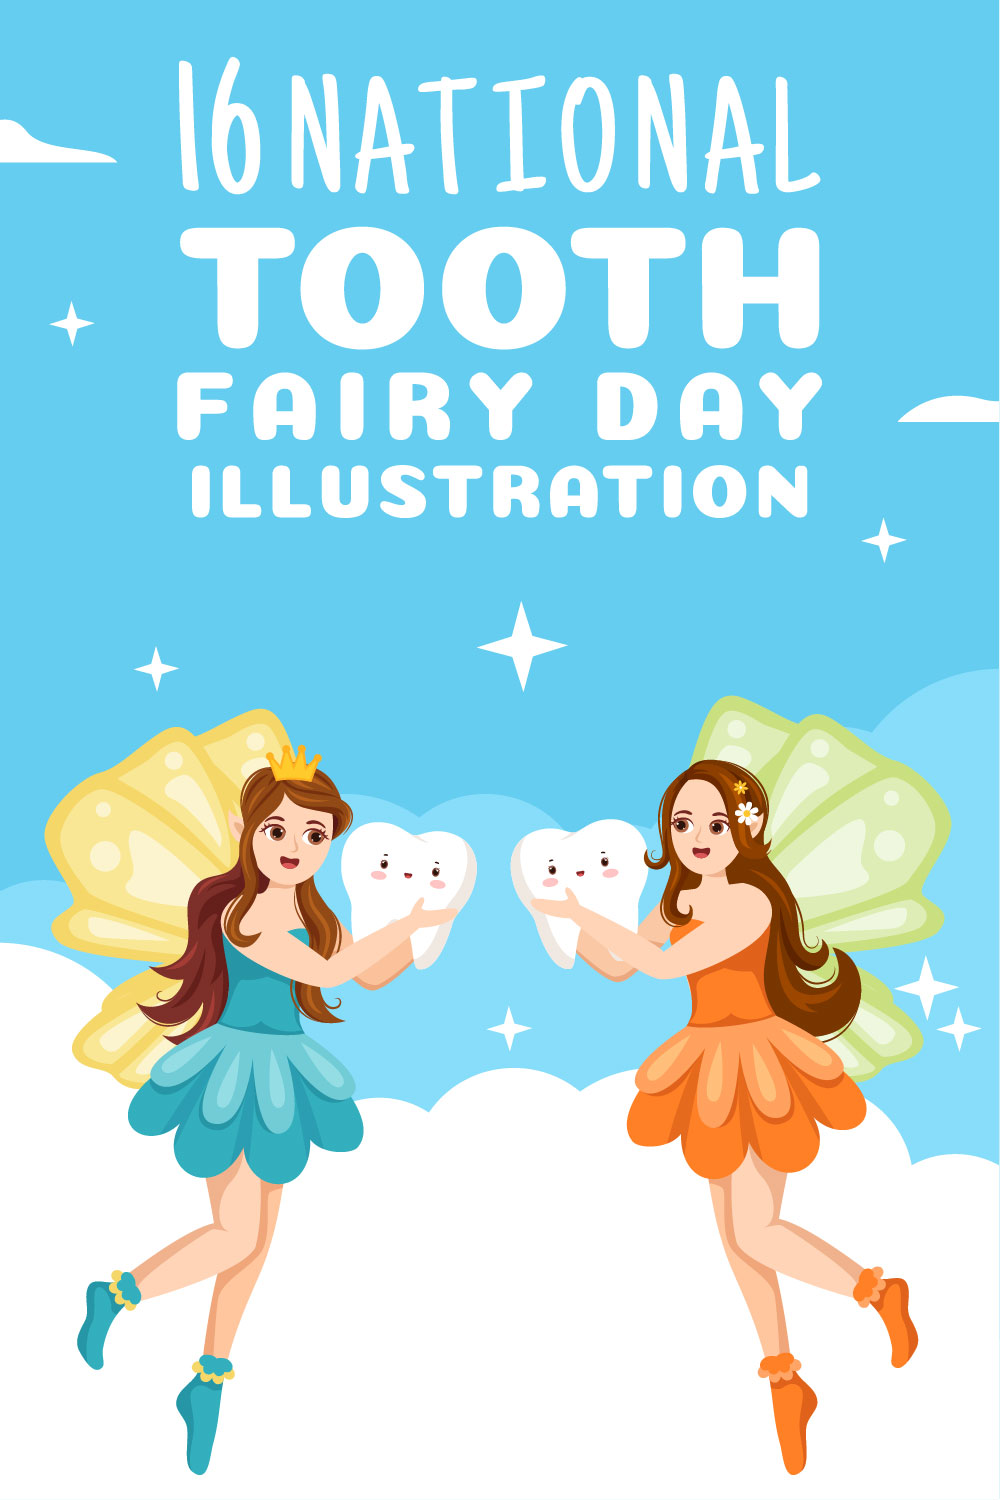 National Tooth Fairy Day Illustration pinterest image.